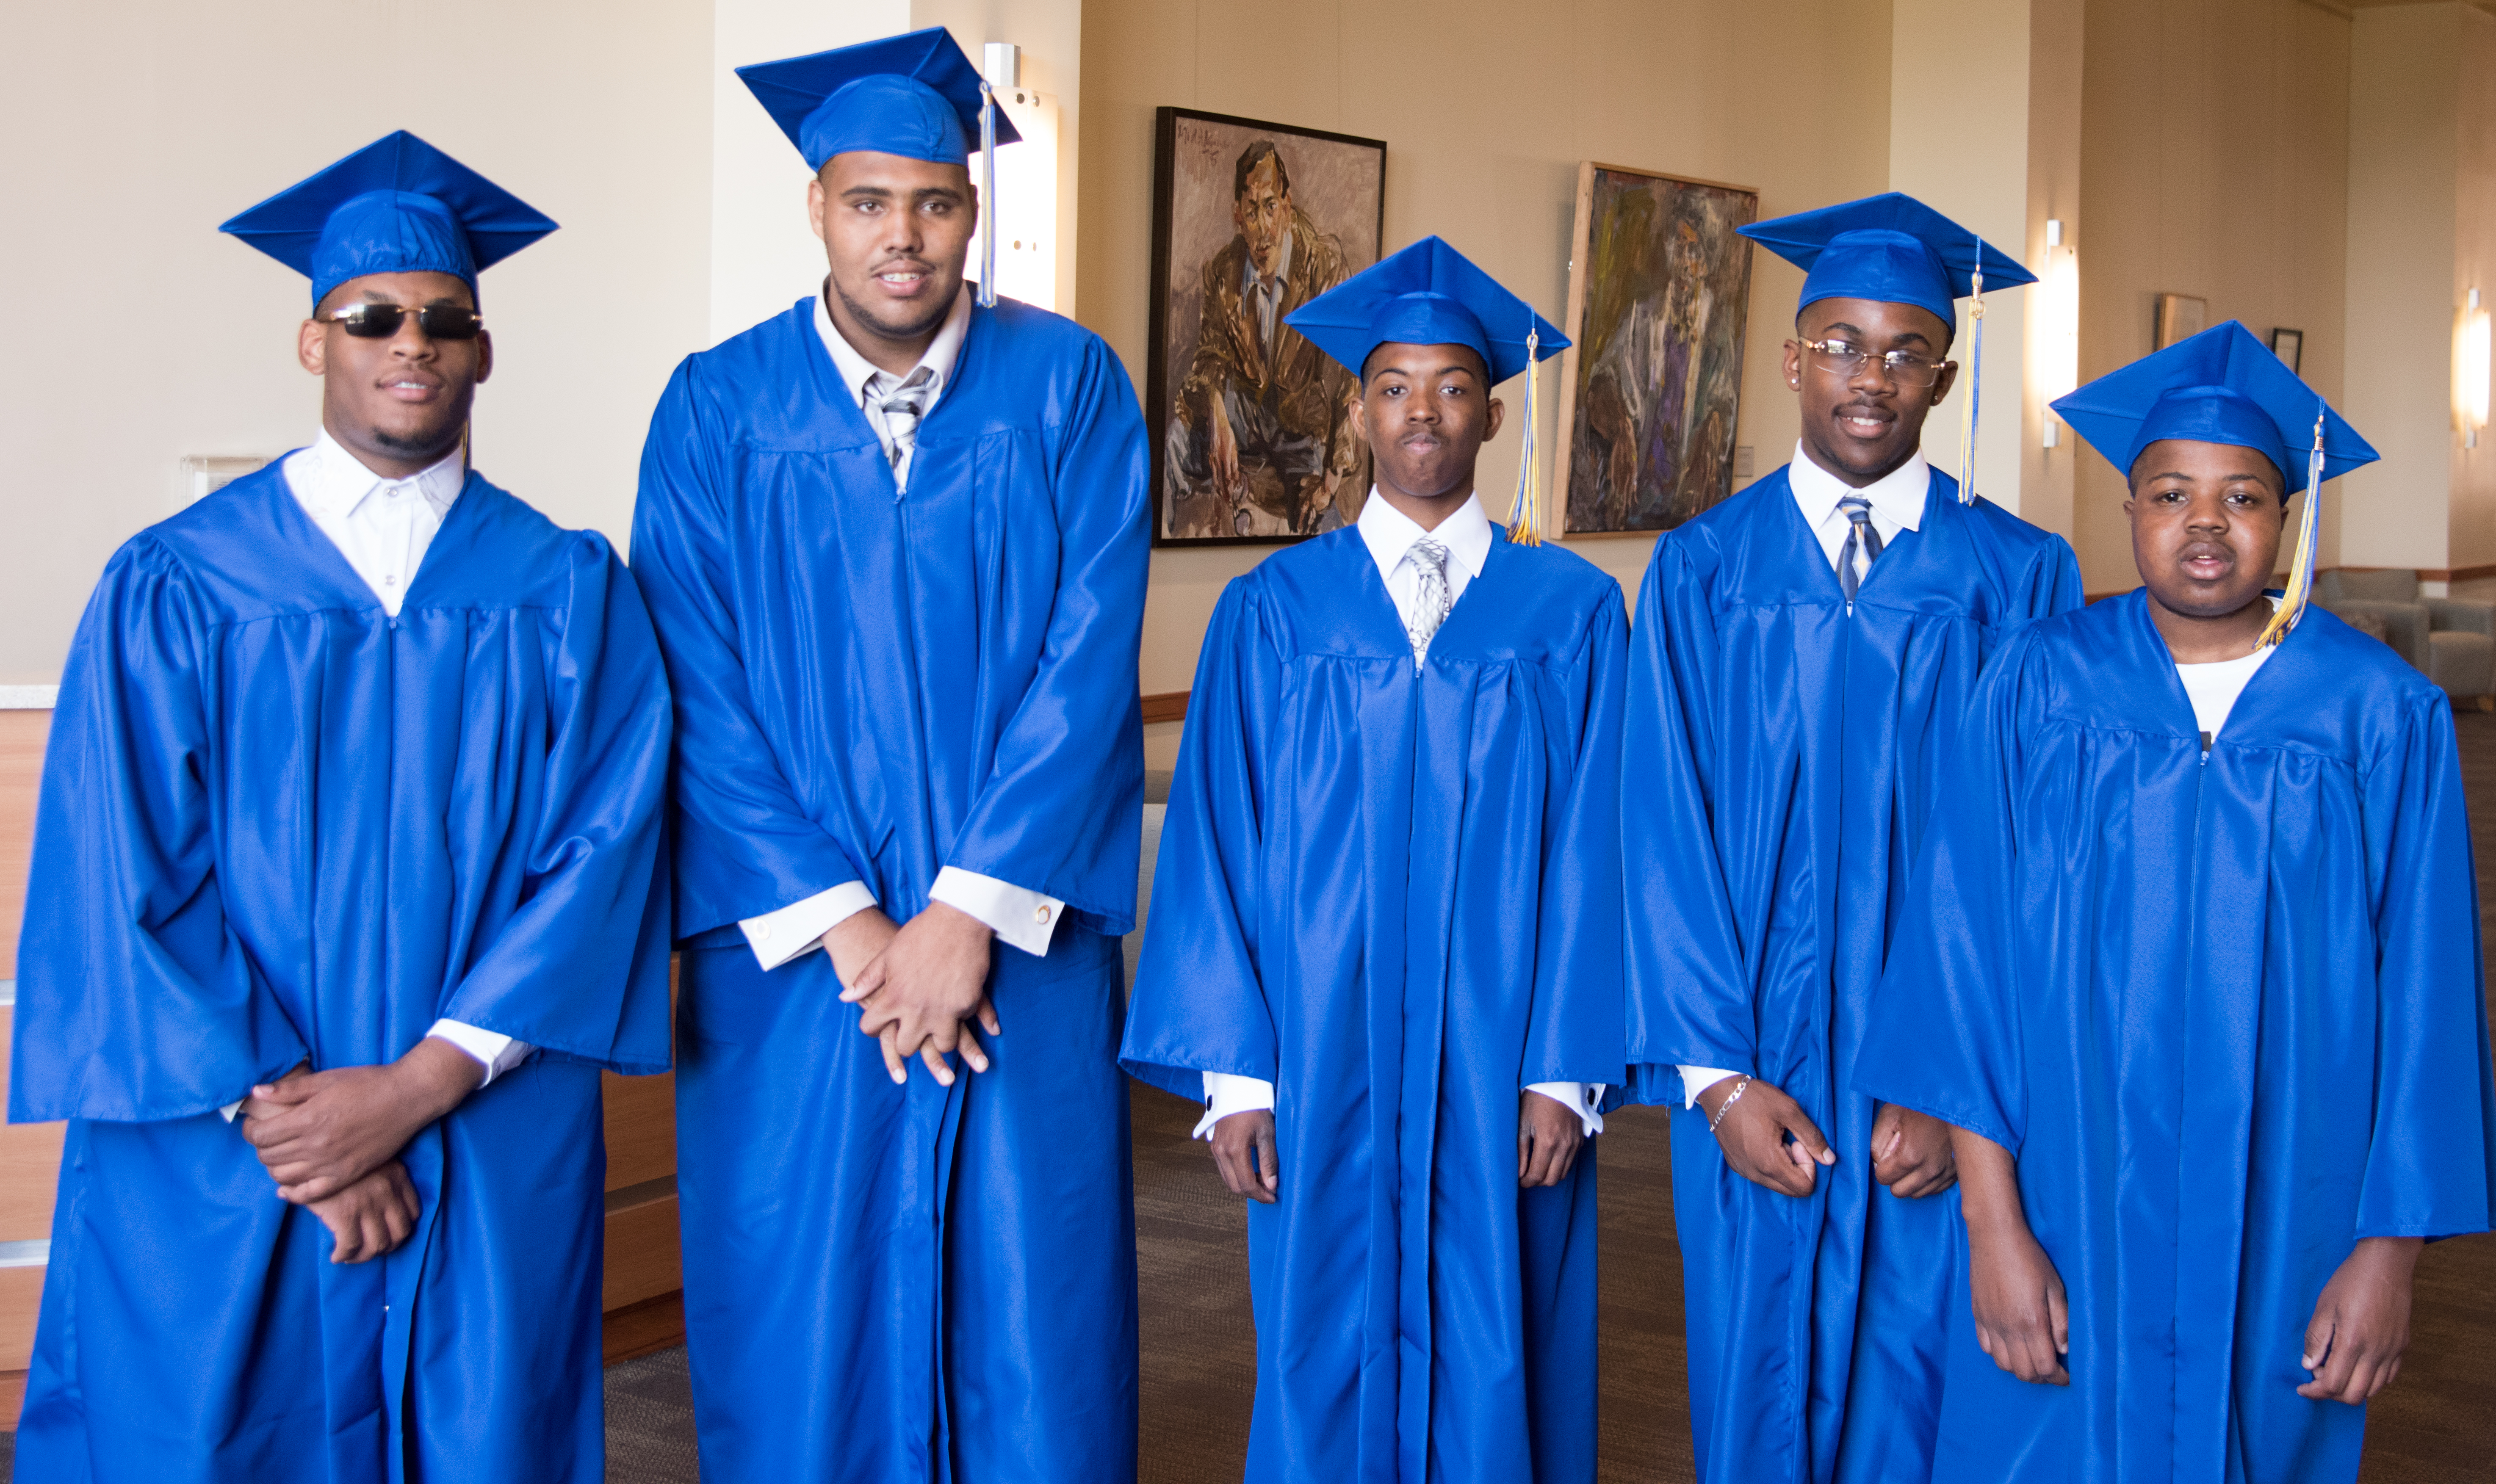 From left, Darrius Patterson, Derreck Vaughn, Larry Flagg, Dennis Bryant, and Anthony Bazemore Jr. graduated from the Project SEARCH program on June 3, along with three students not pictured: Eric Brown, Brianna Davis, and Brittany Thomas.